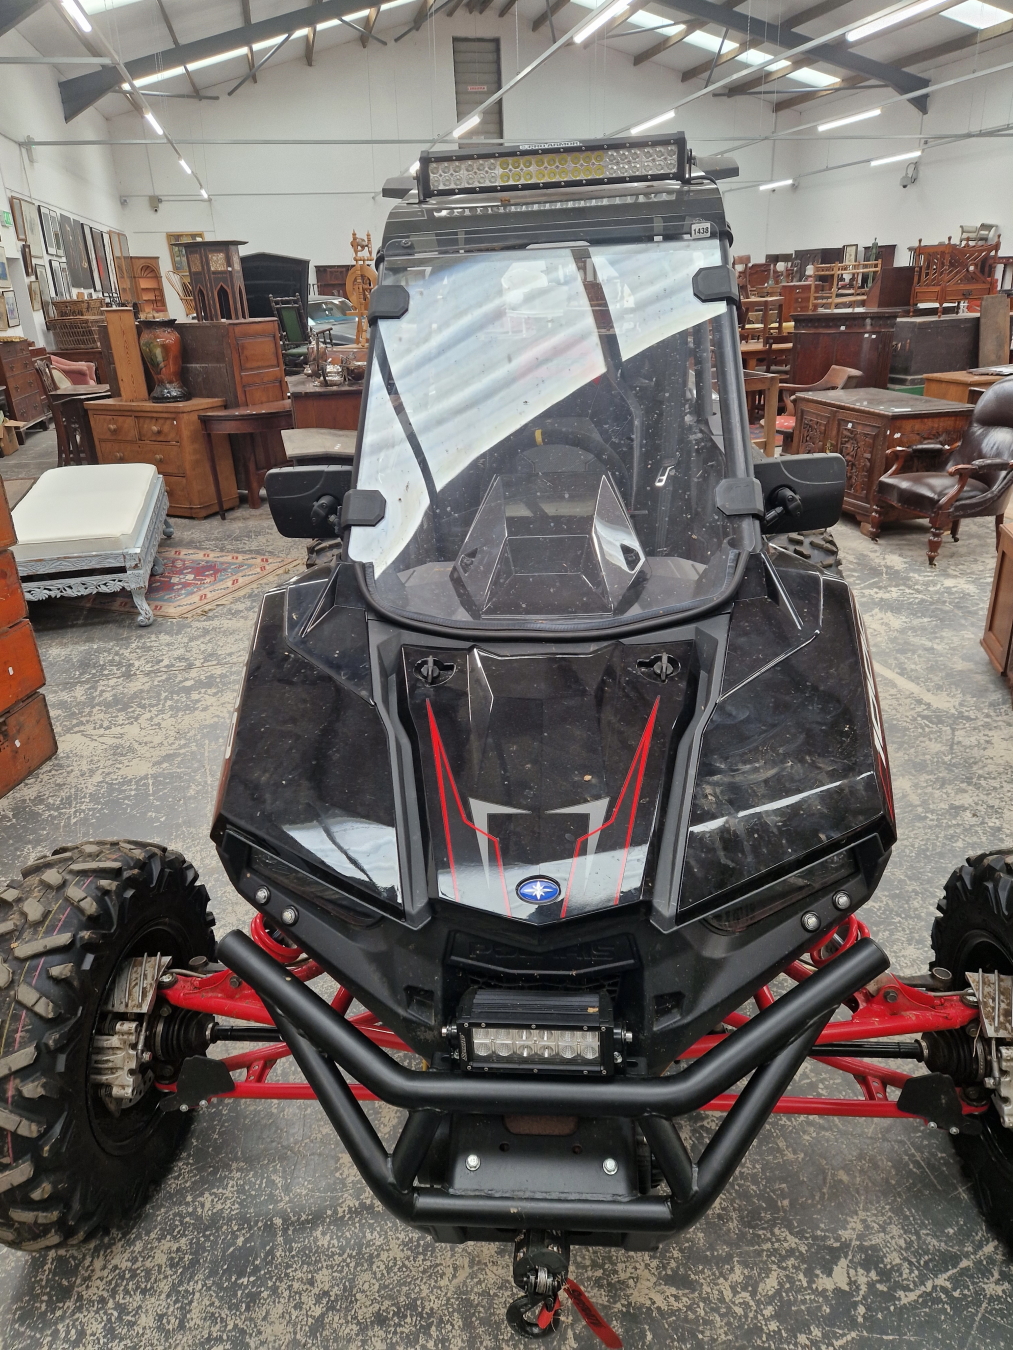 POLARIS RZR RSI 1000 ON /OFF ROAD BUGGY. 2020. FULLY ROAD LEGAL AND IN EXCELLENT CONDITION. WITH - Image 5 of 13